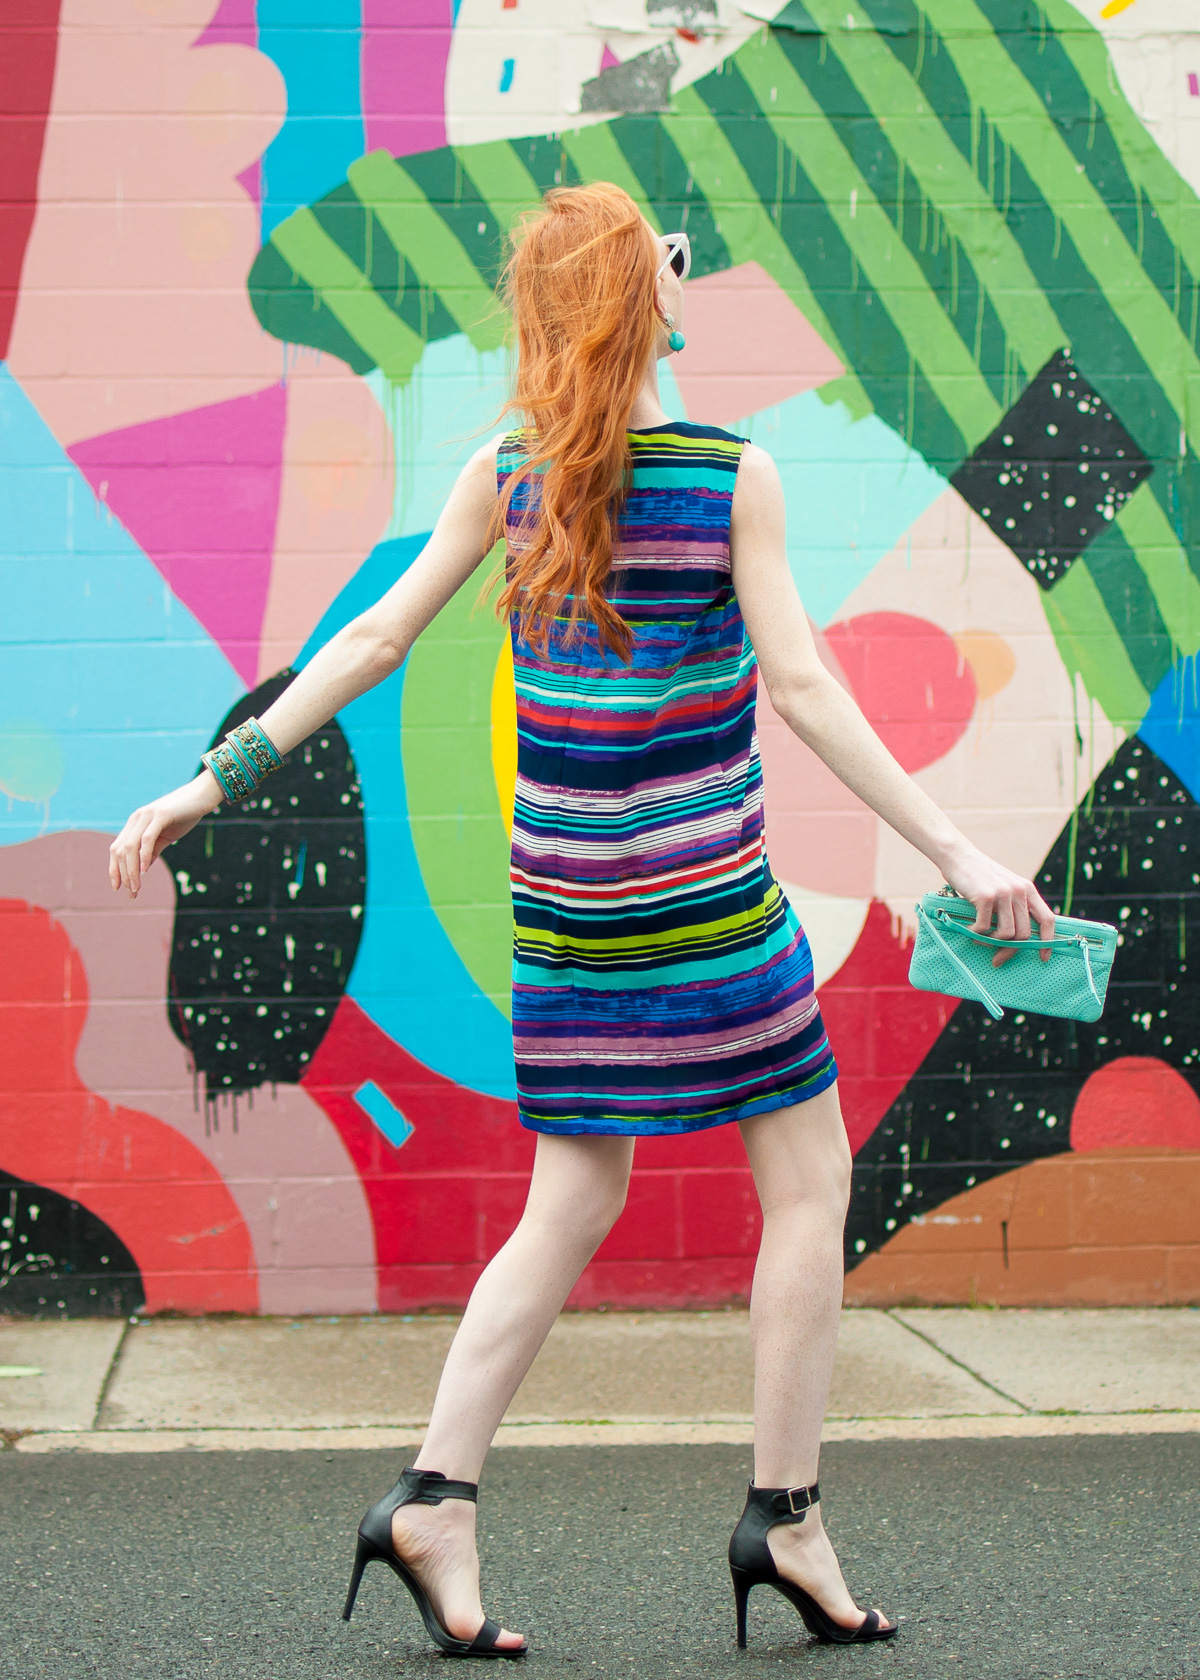 The Red Hand Color Bomb - Cynthia Rowley dress, Banana Republic clutch, Candies ankle strap heels